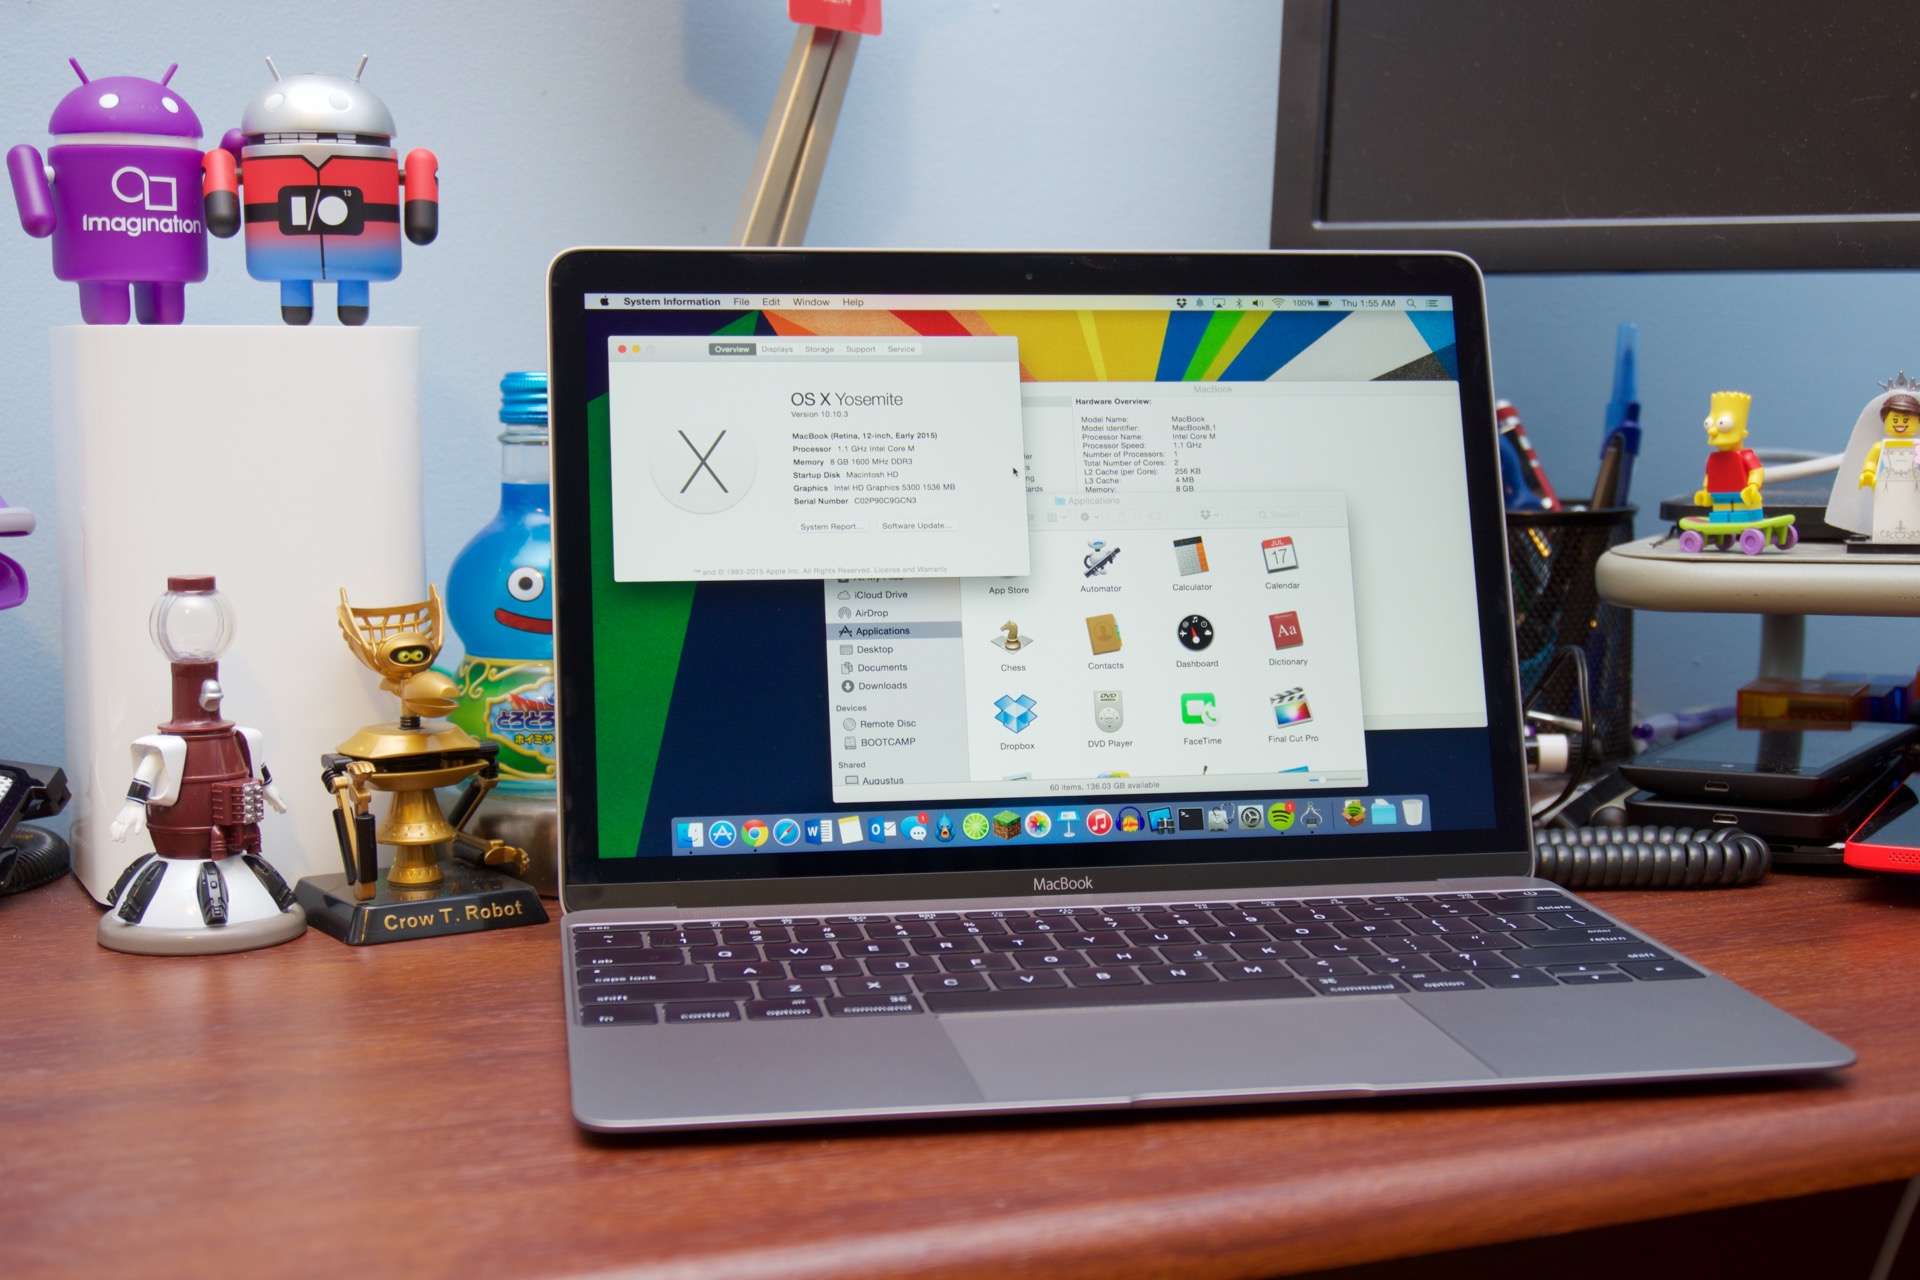 Review: The 2015 MacBook Air's once-trailblazing design is showing its age